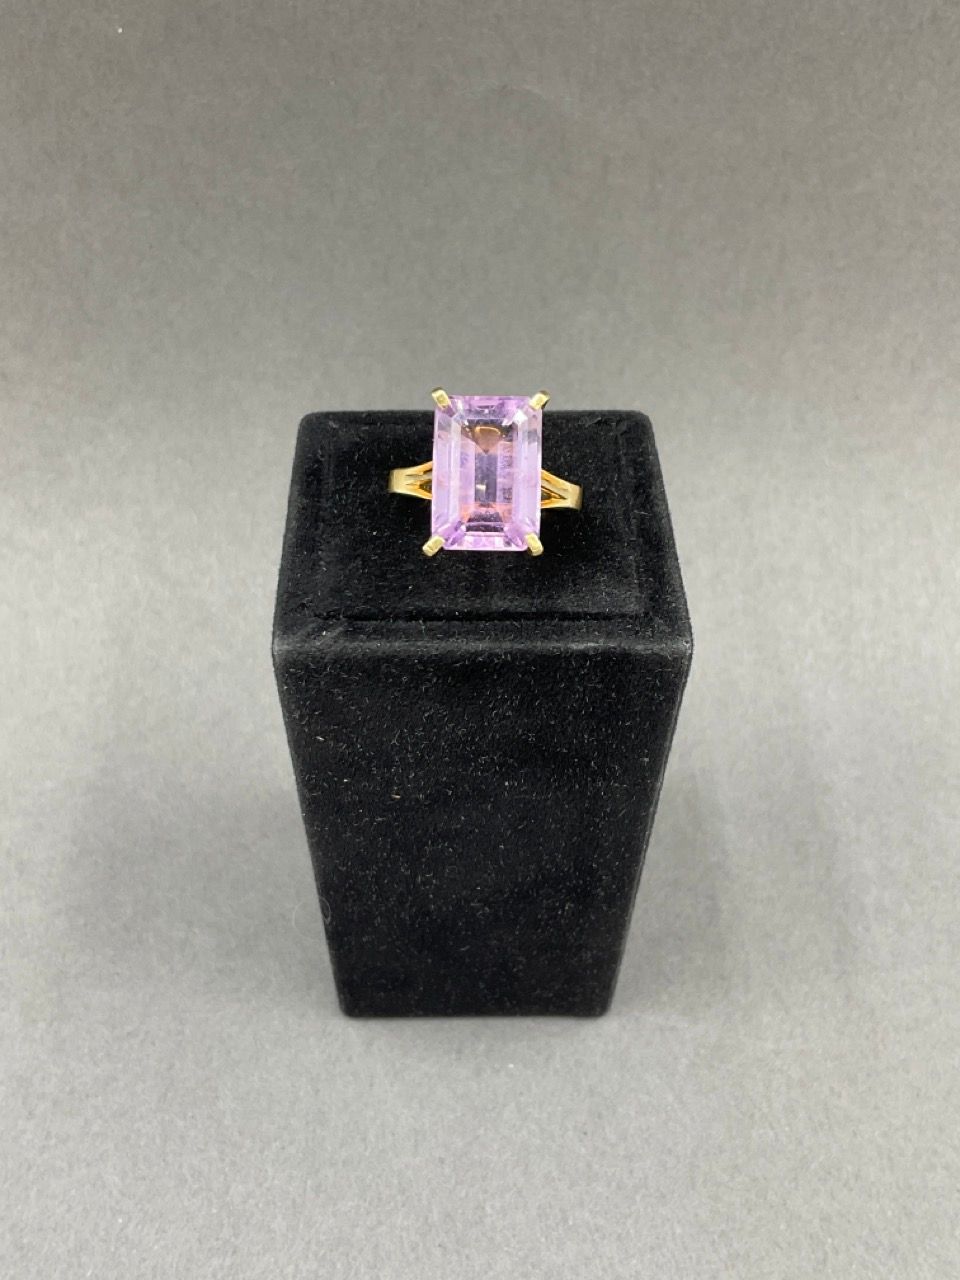 Null RING in yellow gold 18 750/°° decorated with a rectangular amethyst with cu&hellip;